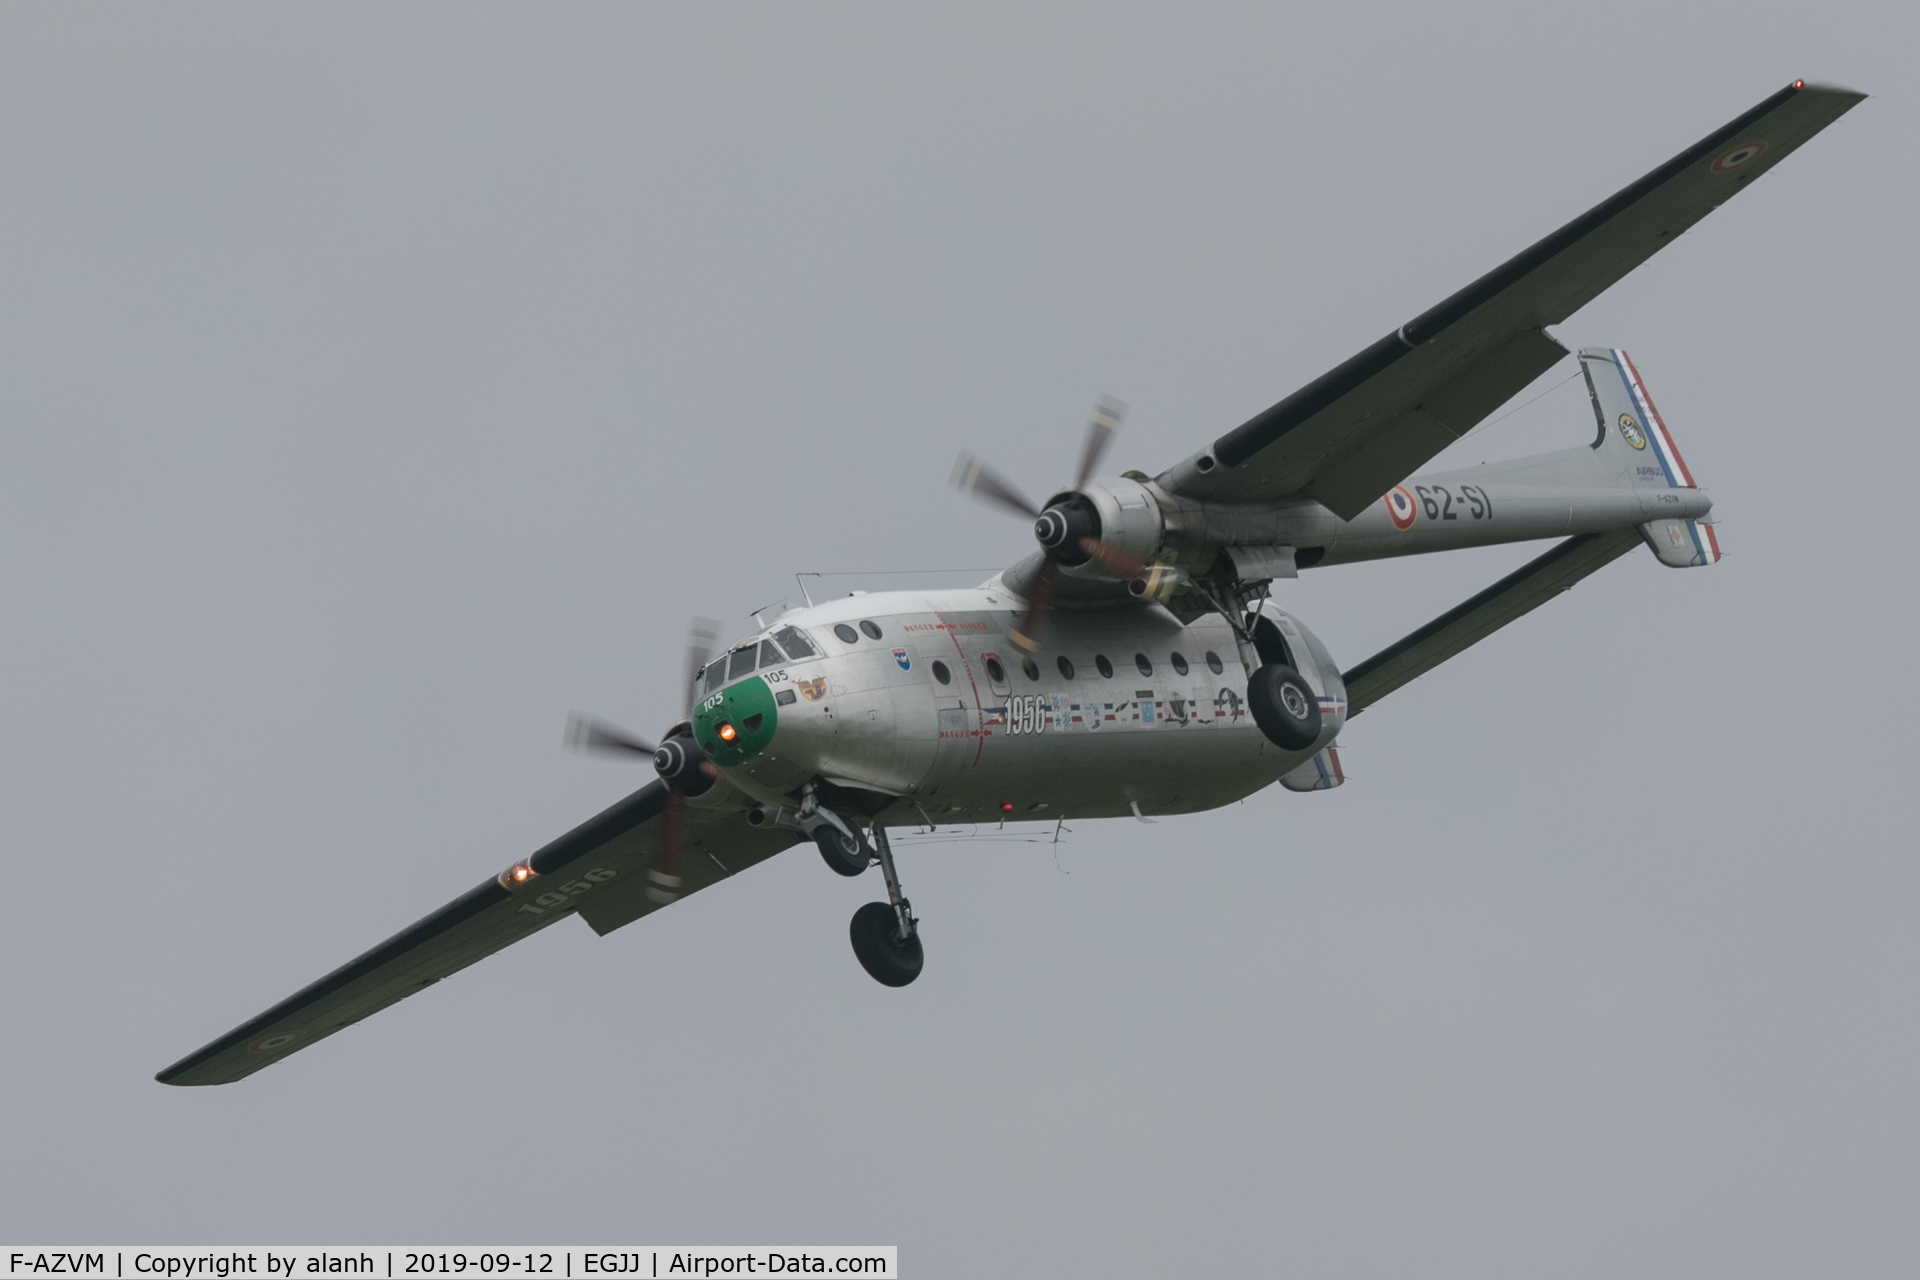 F-AZVM, 1956 Nord N-2501F Noratlas C/N 105, On approach for 27 after displaying at Jersey airshow, 2019